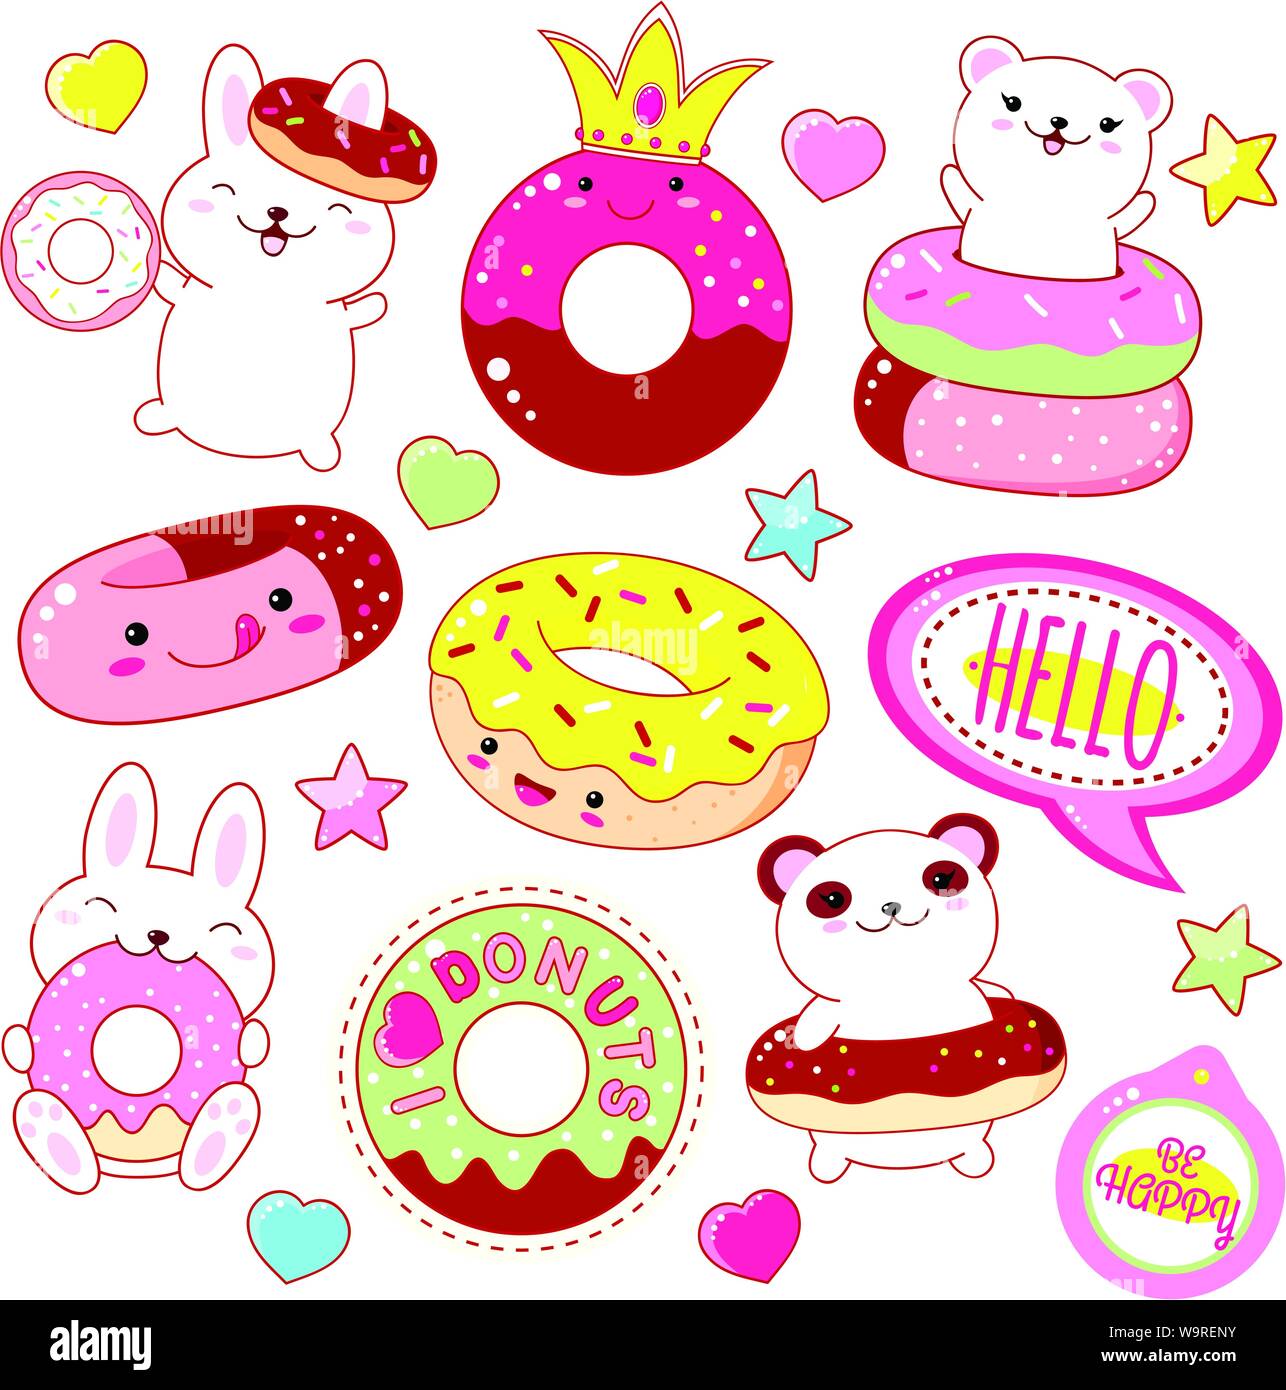 Set of cute donut icons in kawaii style with smiling face and pink cheeks for sweet design. Sticker with inscription I love donuts and Be happy. Bunny Stock Vector